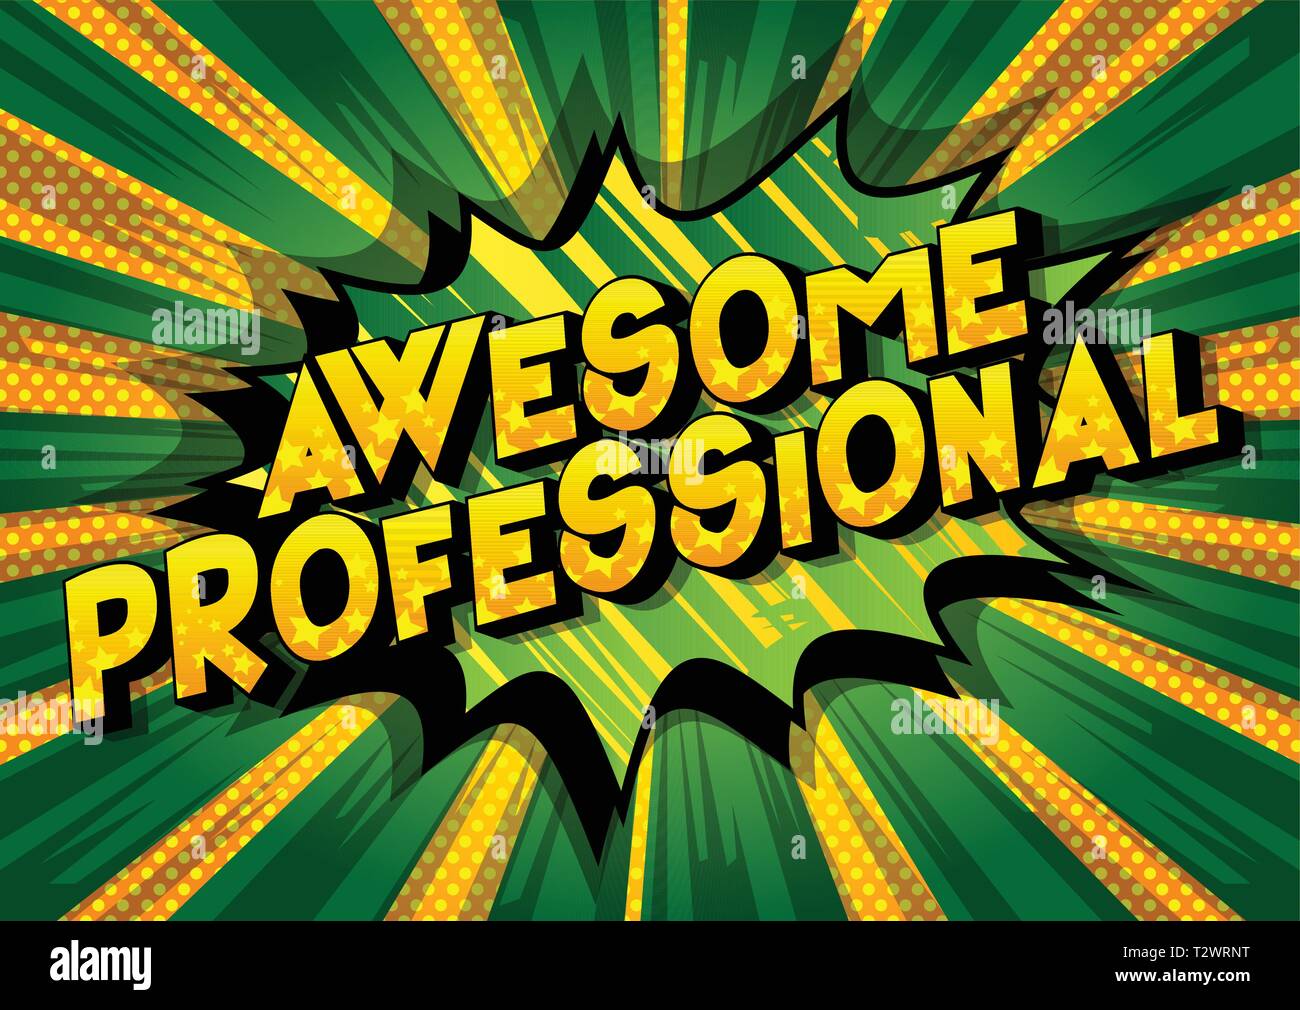 Awesome Professional - Vector illustrated comic book style phrase on abstract background. Stock Vector